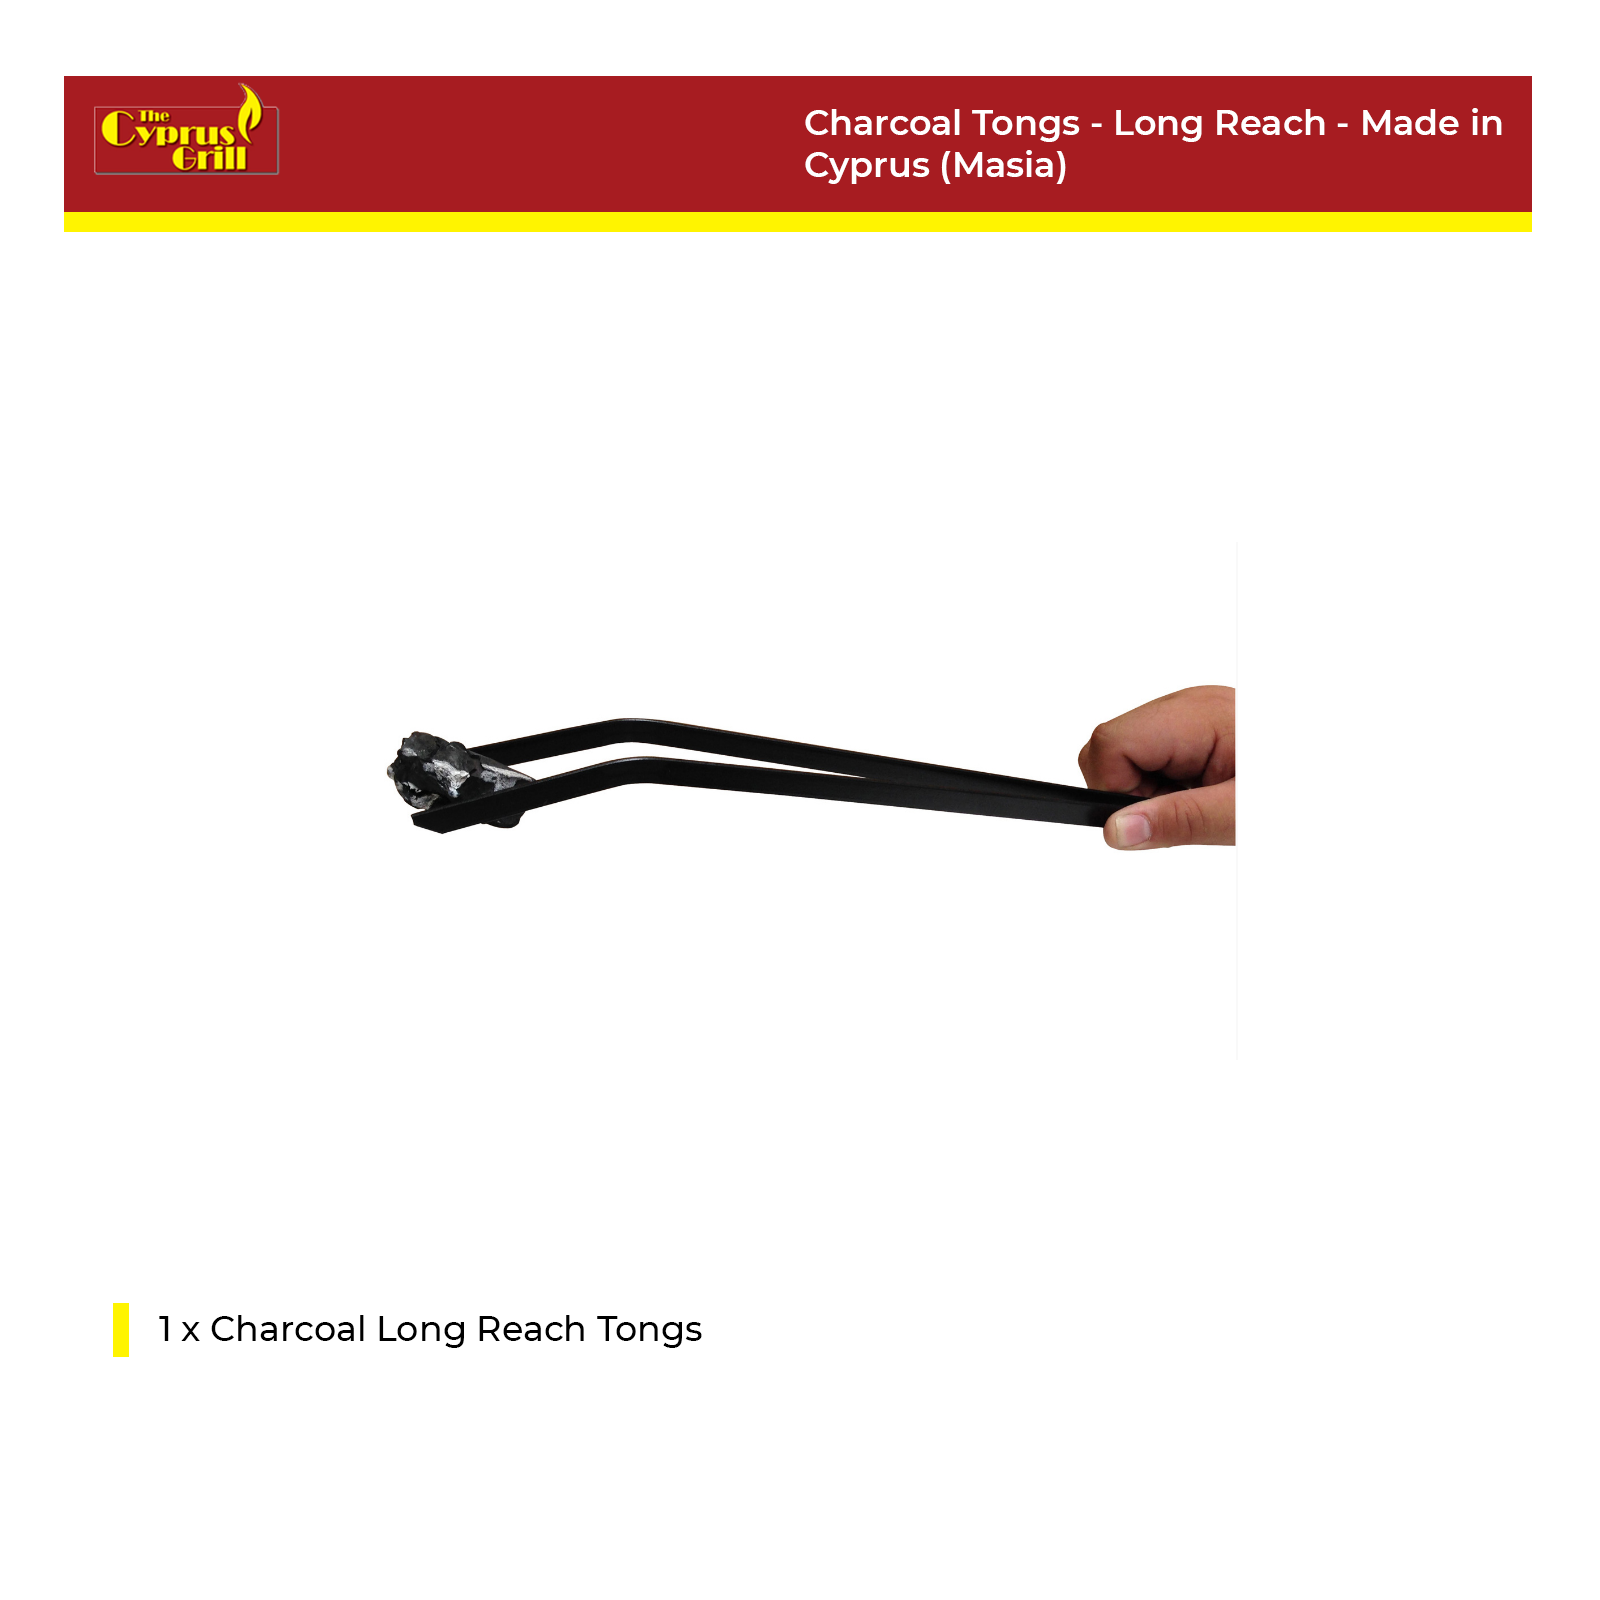 Charcoal Tongs - Long Reach - Made in Cyprus (Masia)